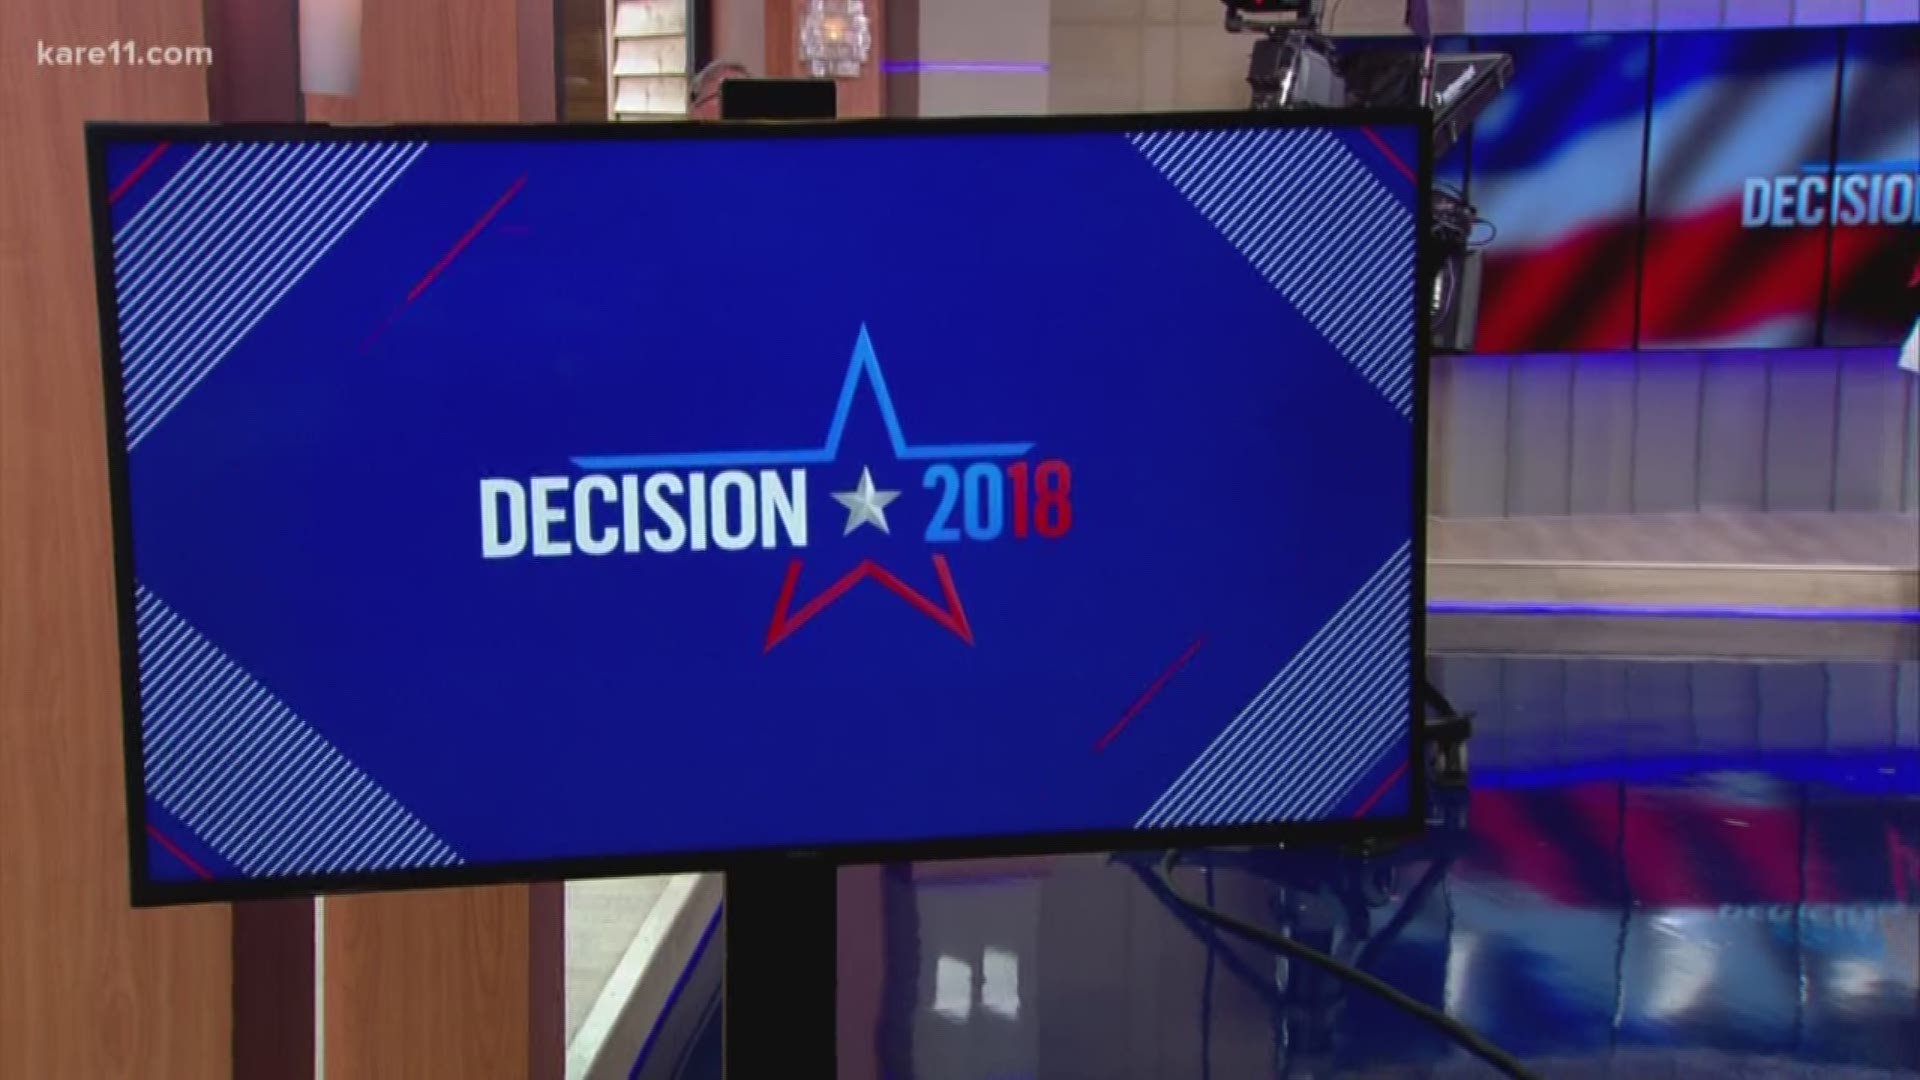 Republicans see an opportunity to flip Minnesota's 8th Congressional District. KARE 11's John Croman takes a look at the competitive race between Democrat Joe Radinovich and the GOP's Pete Stauber.